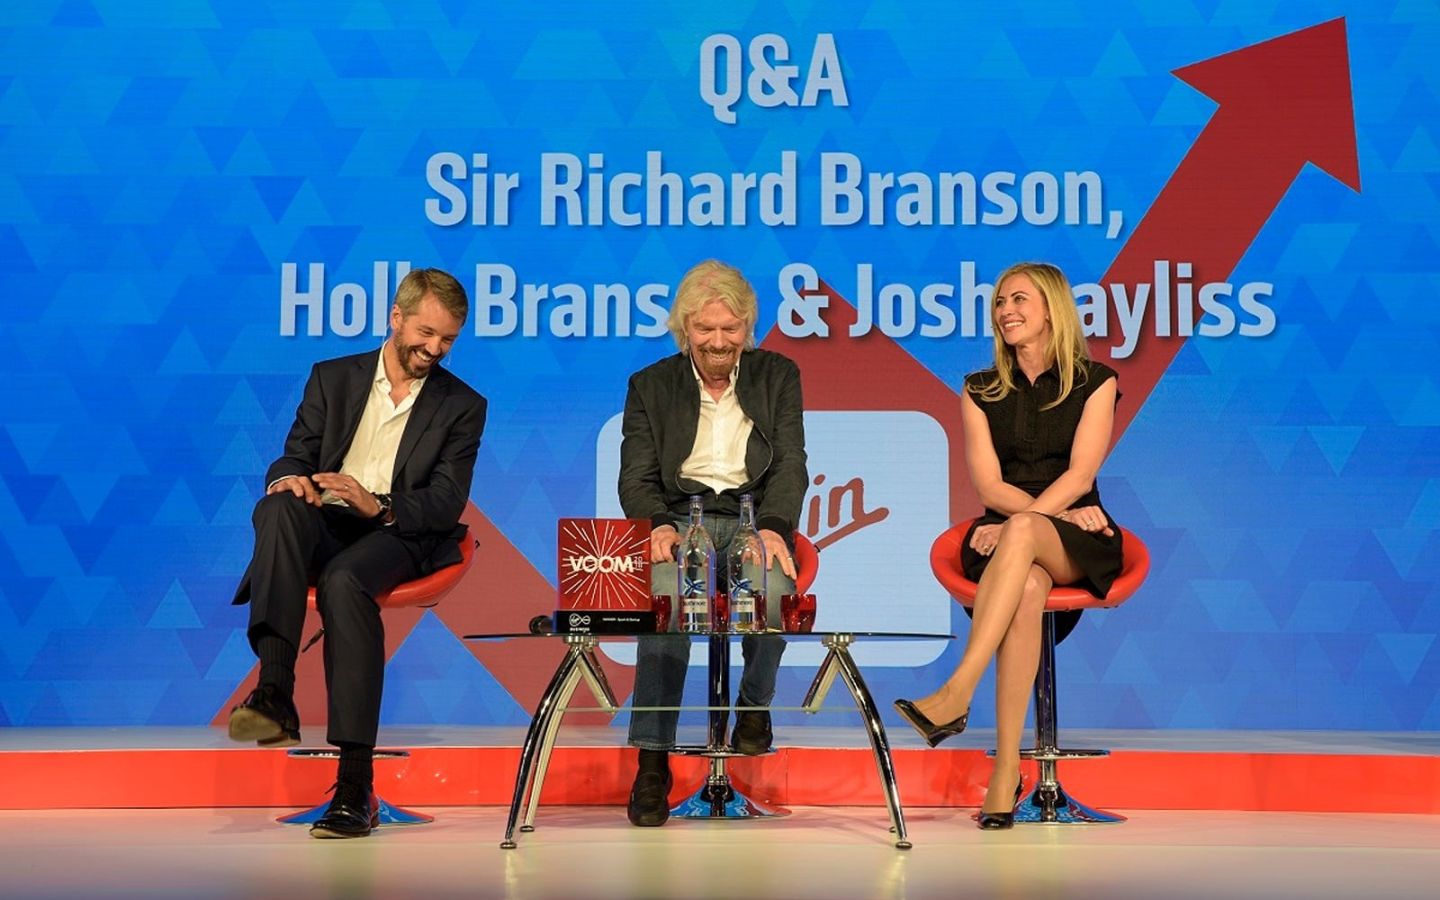 Richard Branson, Holly Branson and Josh Bayliss sit on stage ready for their Q&A session